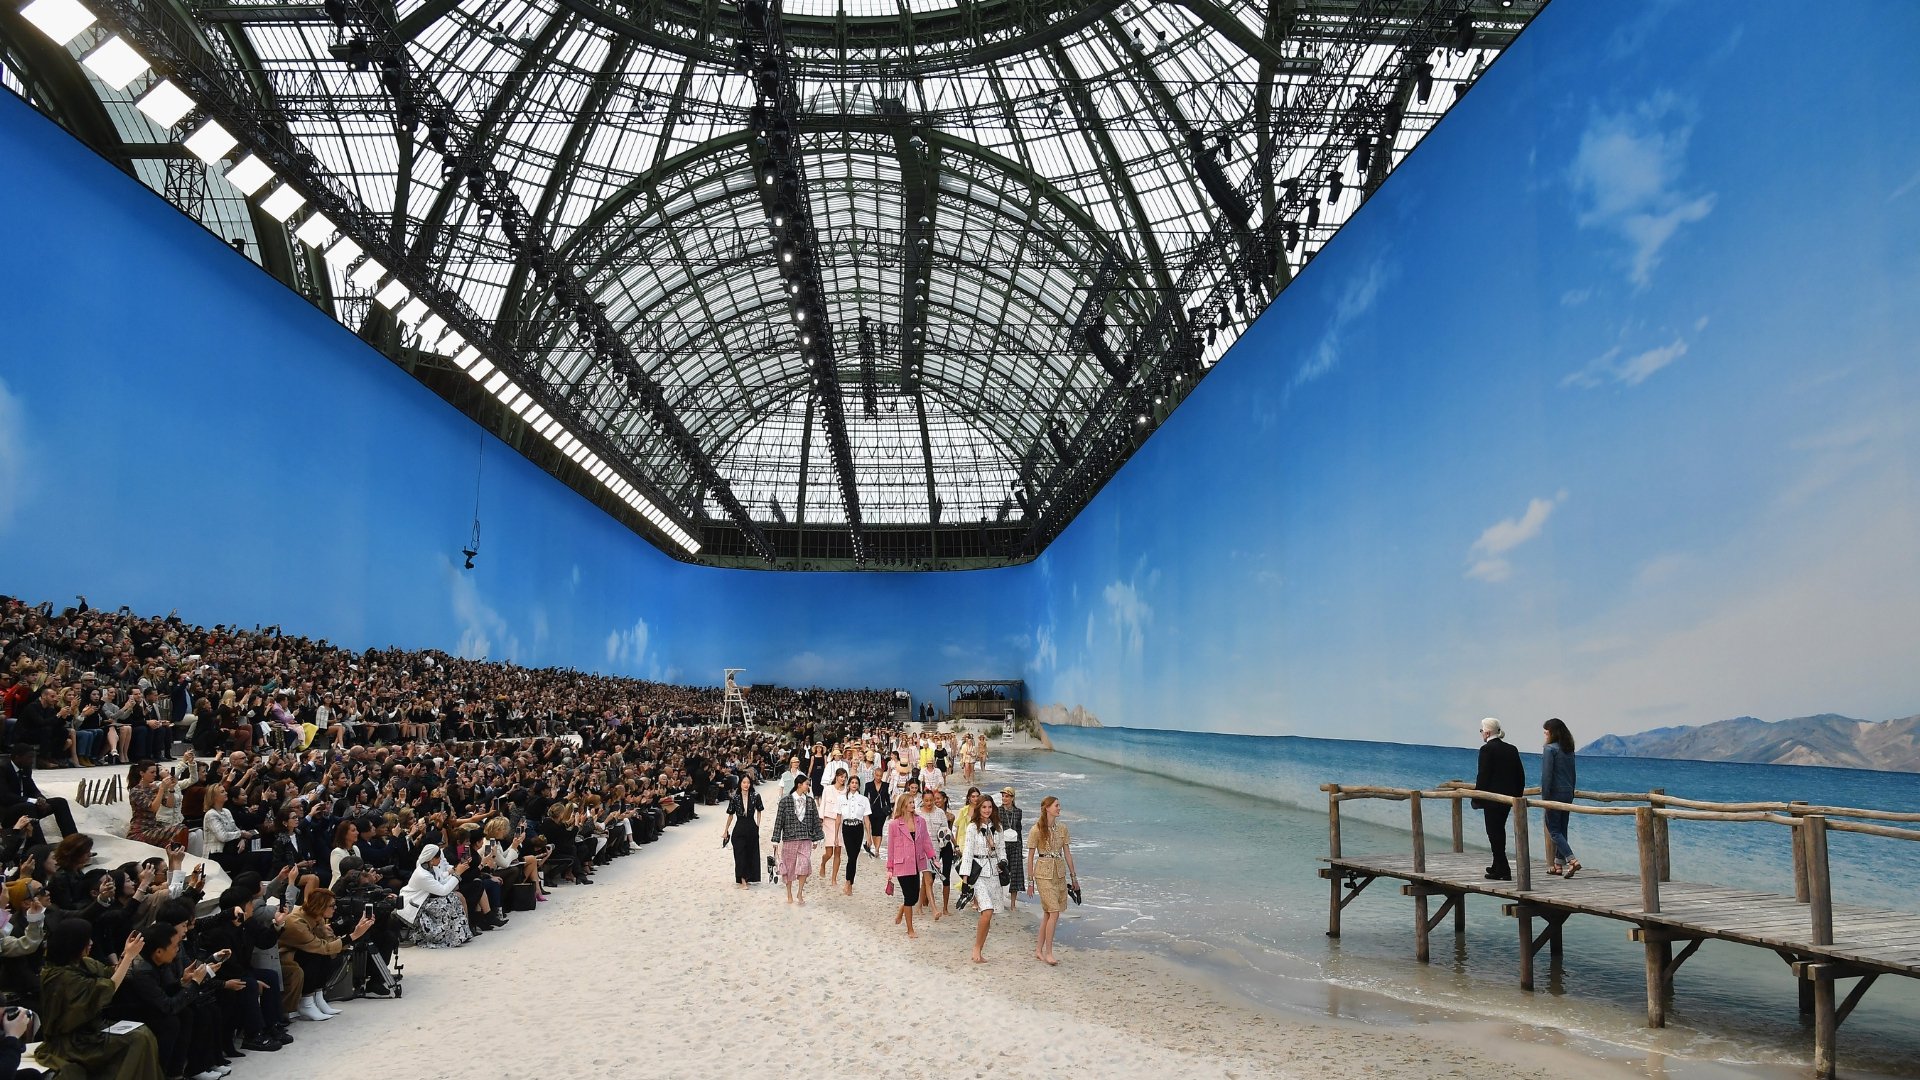 Le Grand Palais Into A Beach For The Chanel Show - Luxury